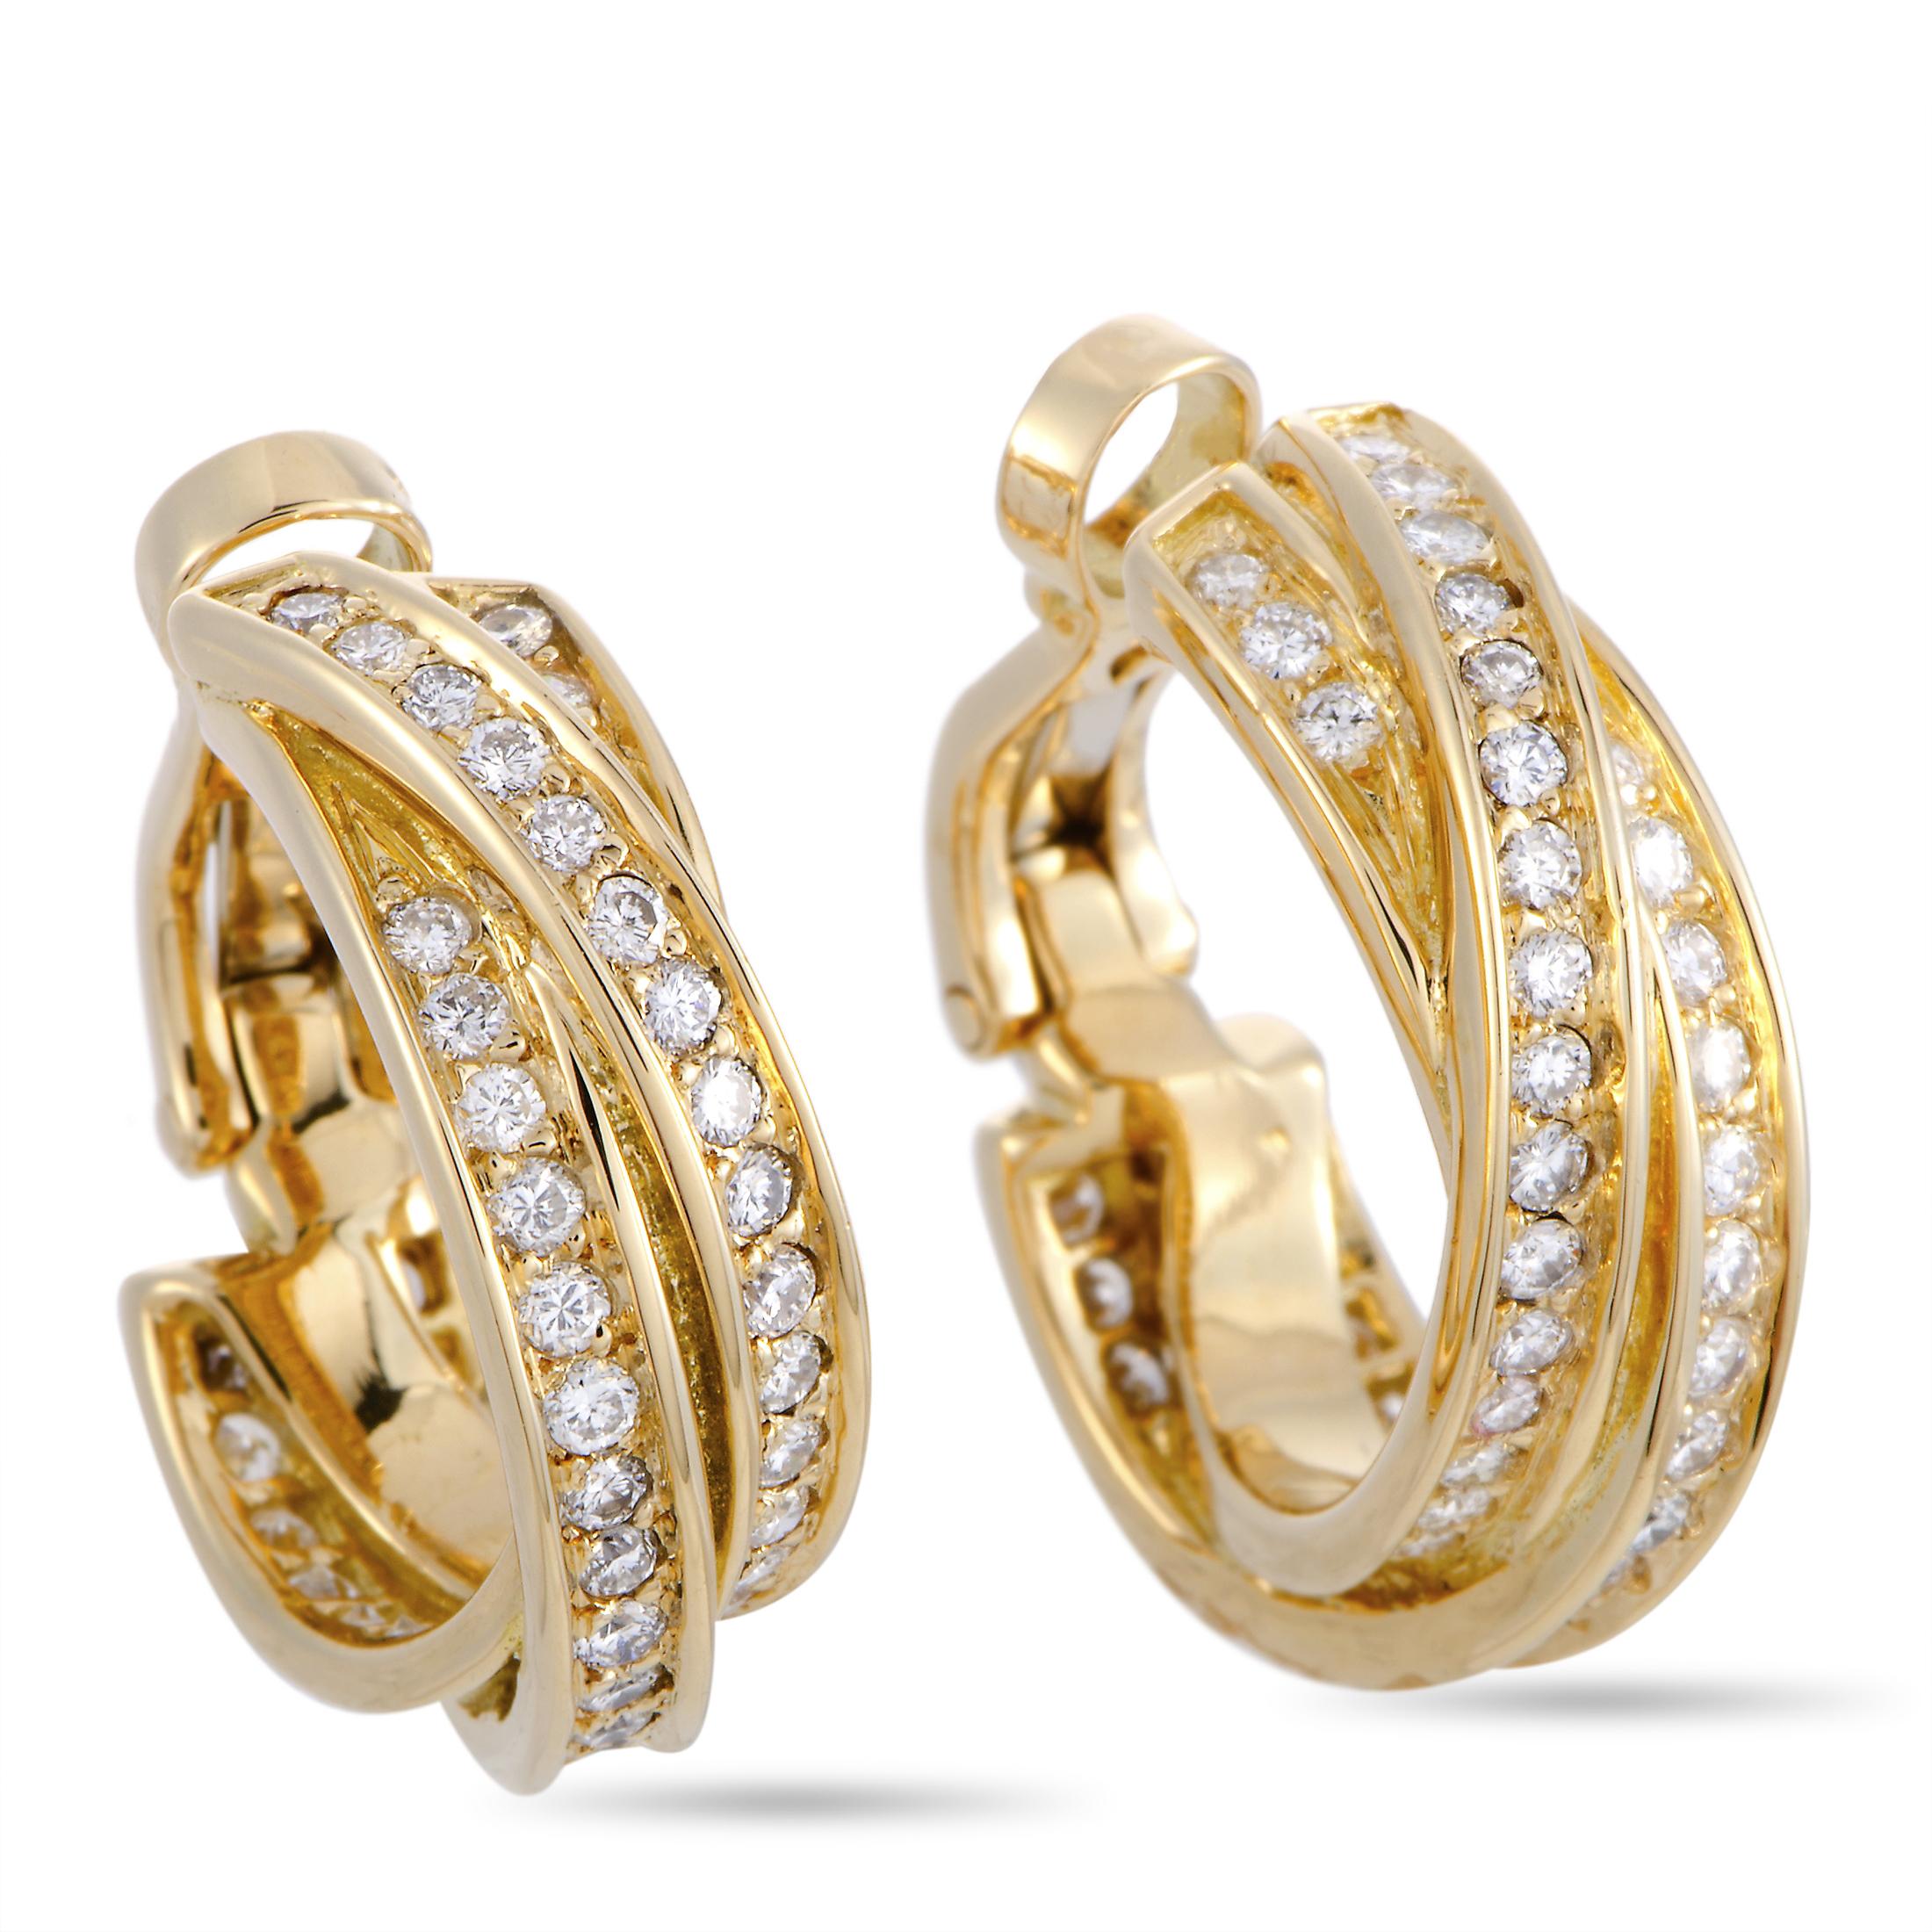 The Cartier “Trinity” earrings are made out of 18K yellow gold and diamonds and each of the two earrings weighs 7.35 grams, measuring 0.81” in length and 0.25” in width.

This pair of earrings is offered in estate condition and includes a gift box.